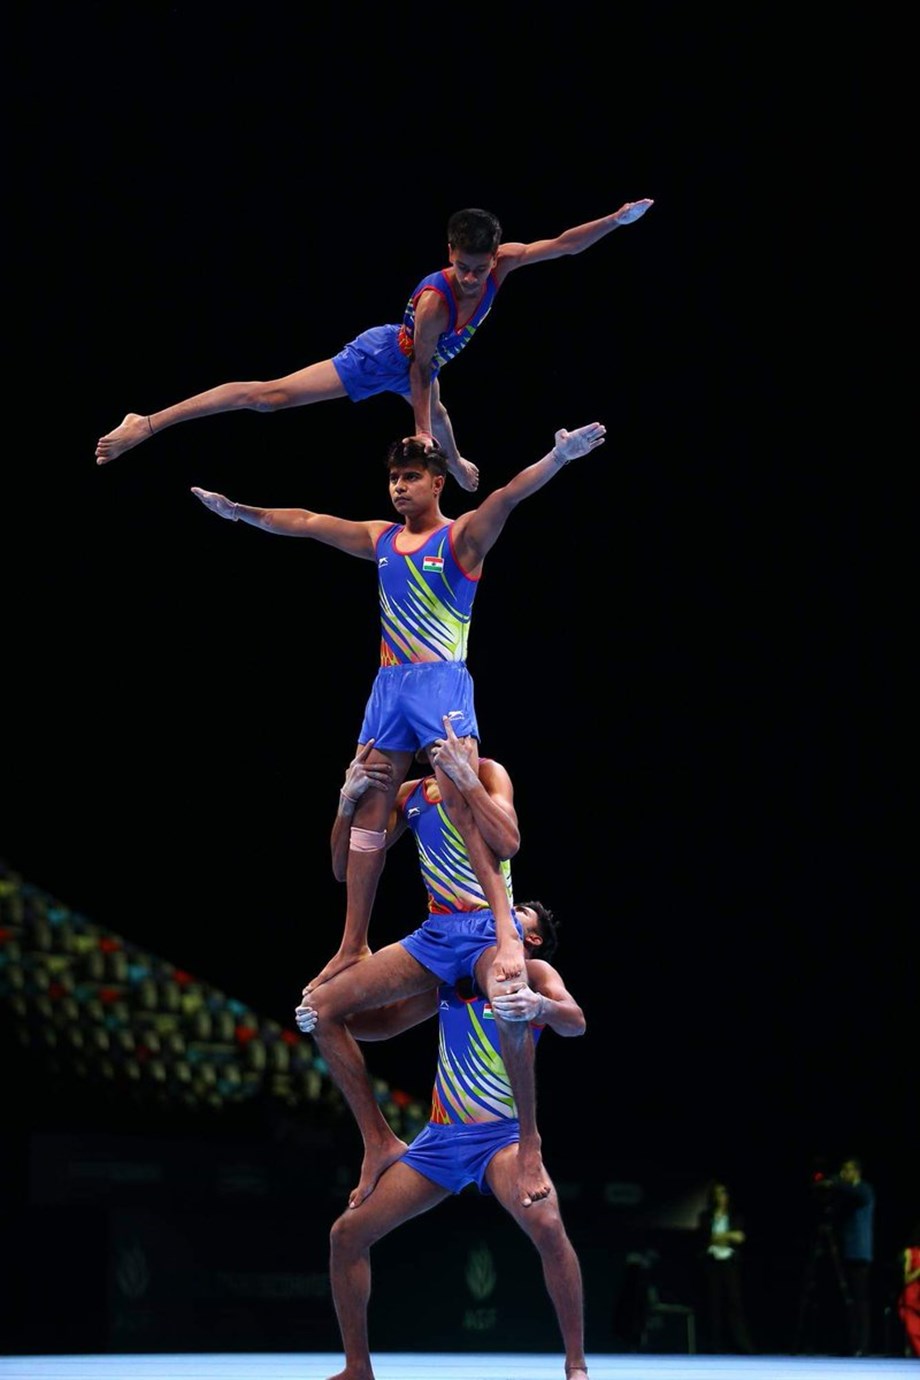 Discover Acrobatic Gymnastics and get started